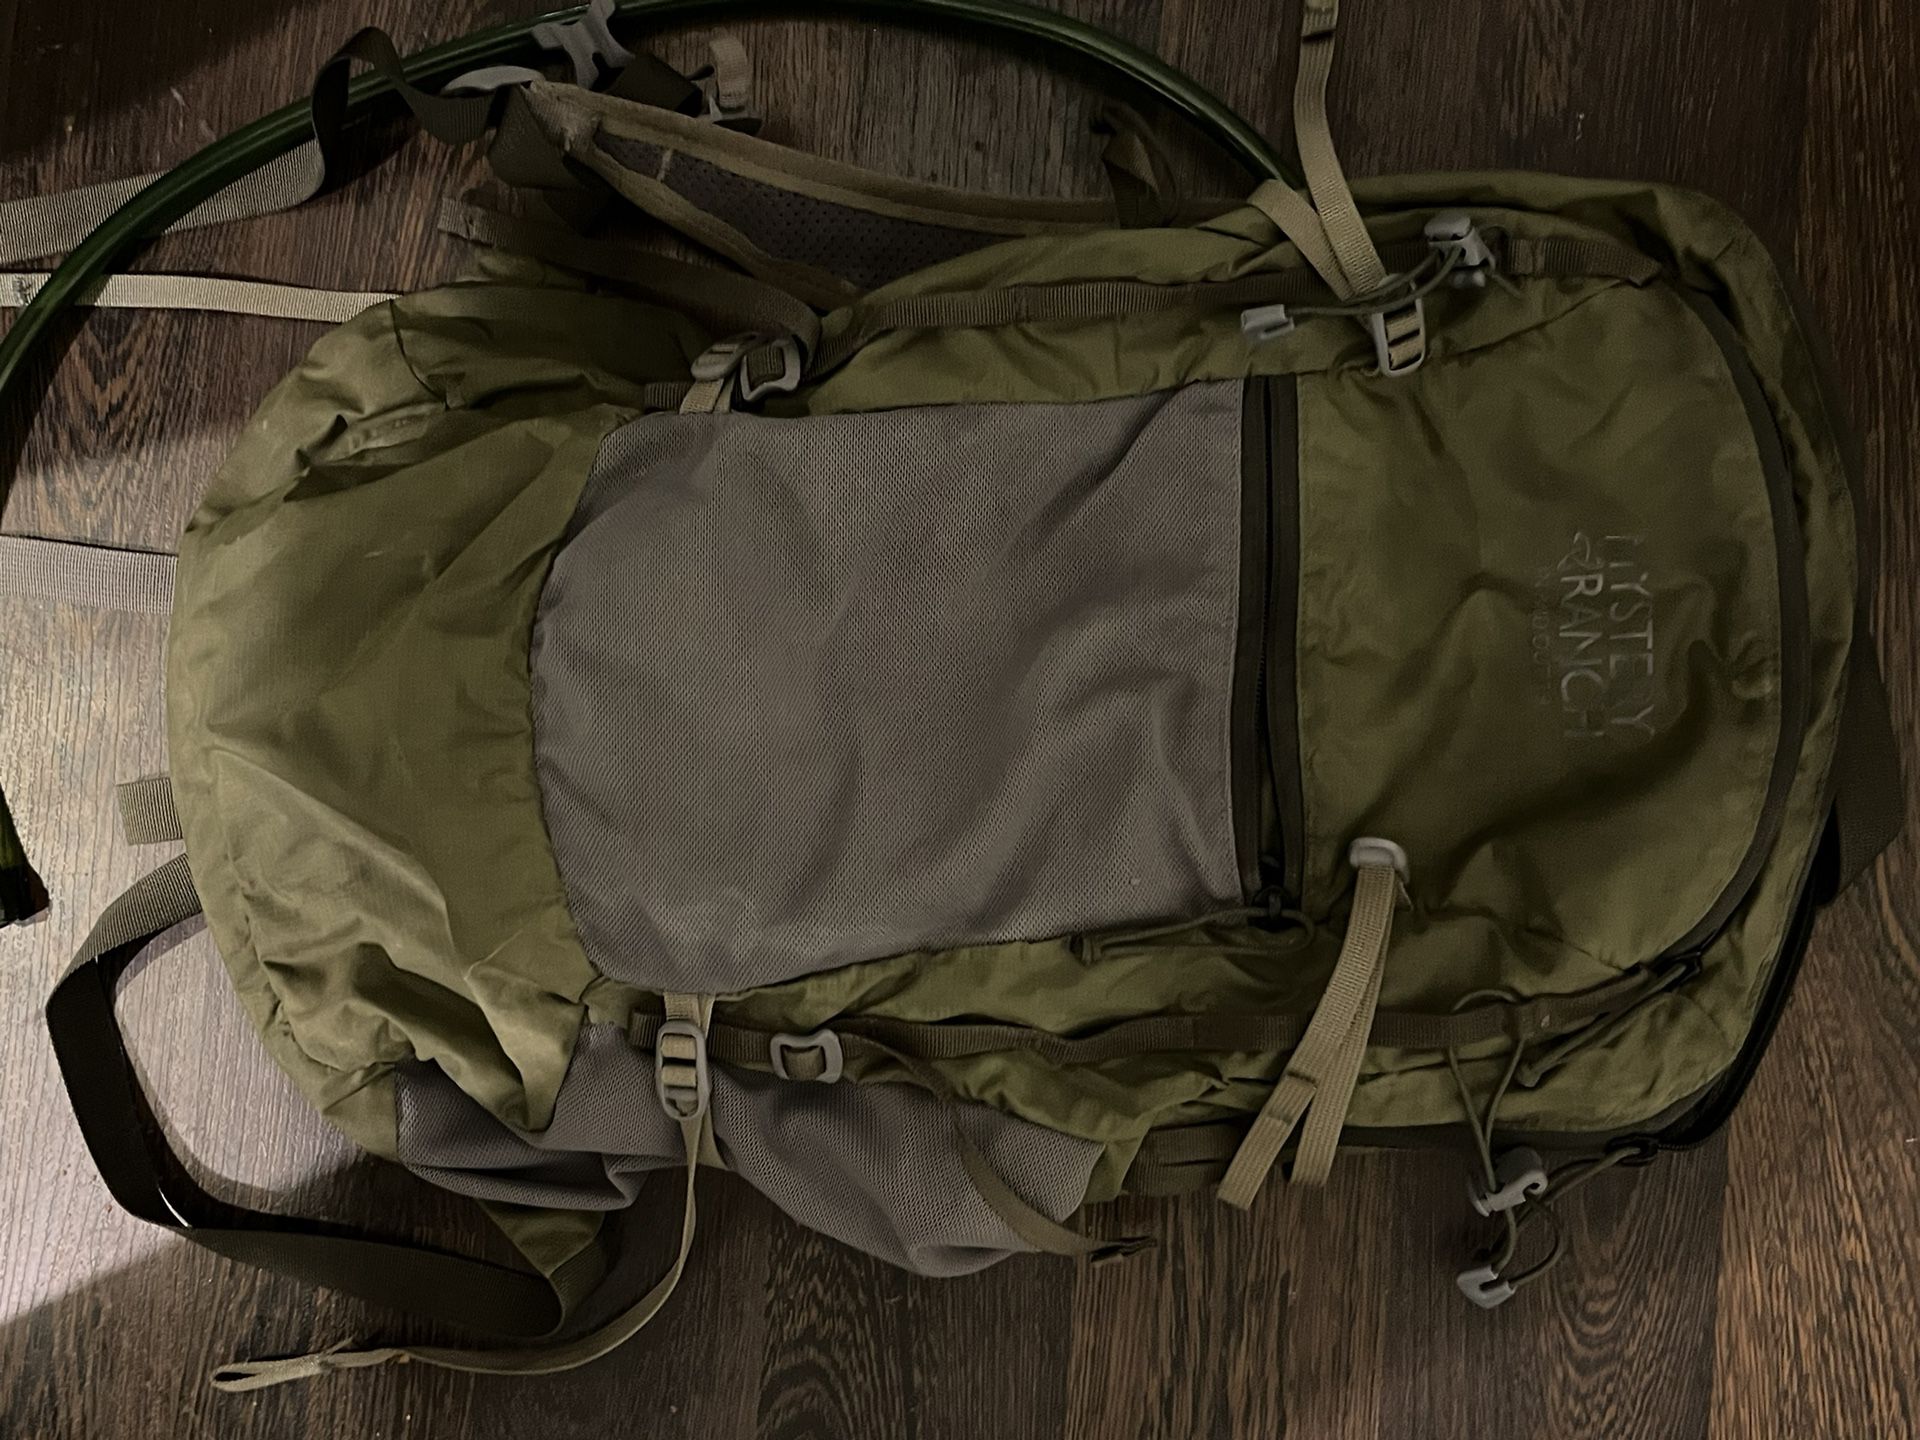 Mystery Ranch 2 Day Bug Out Bag. PRICE NEGOTIABLE